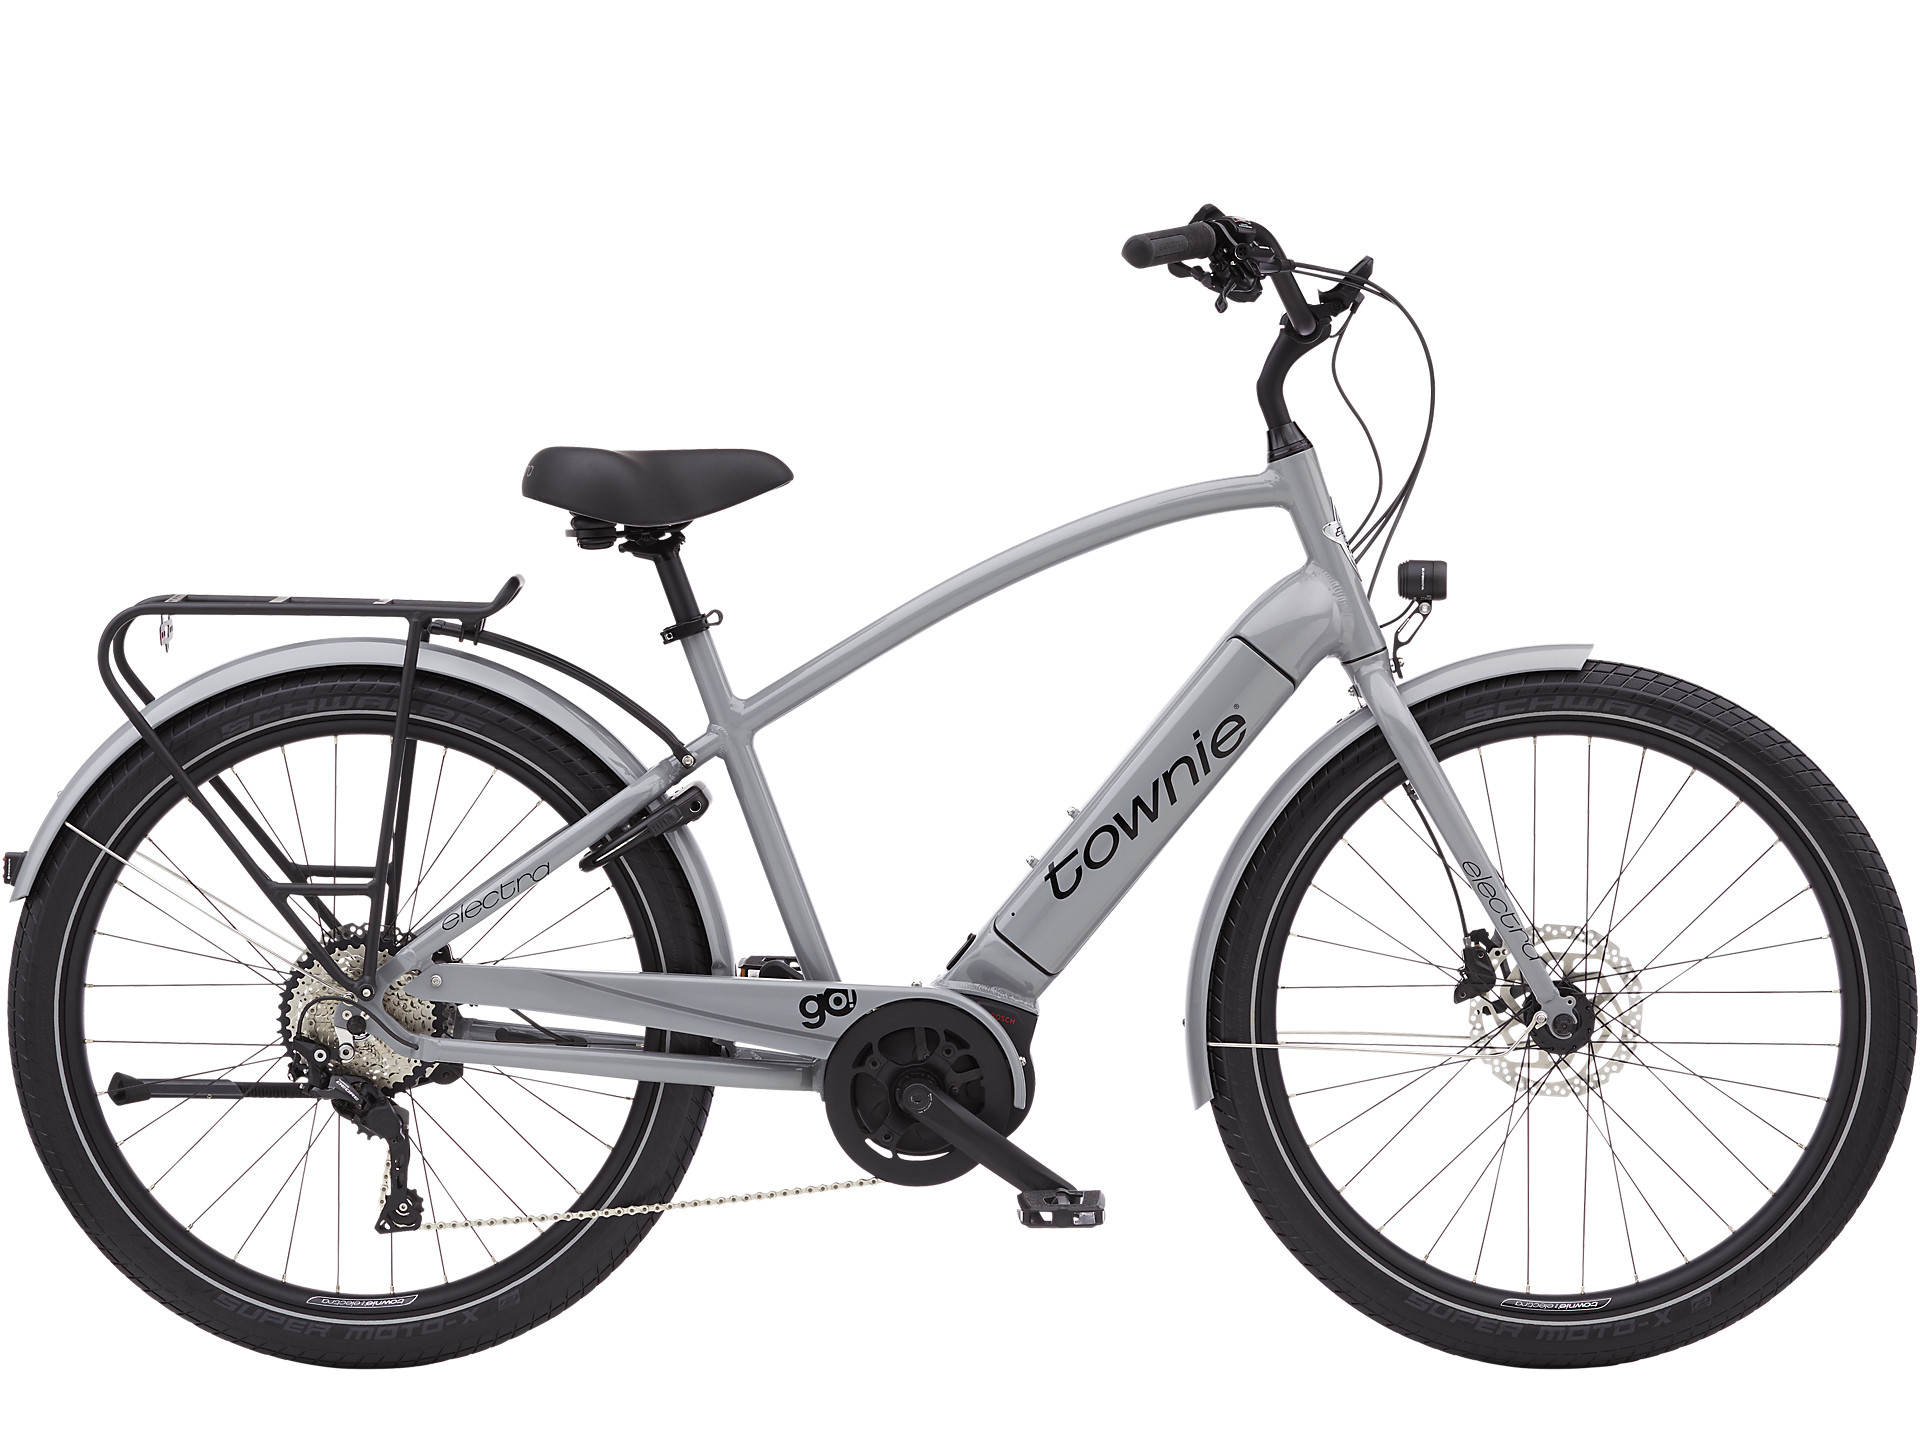 <a href="https://cycles-clement.be/product/townie-path-go-10d-step-over-eu-m-nardo-grey-500w/">TOWNIE PATH GO! 10D STEP OVER EU M NARDO GREY 500W</a>